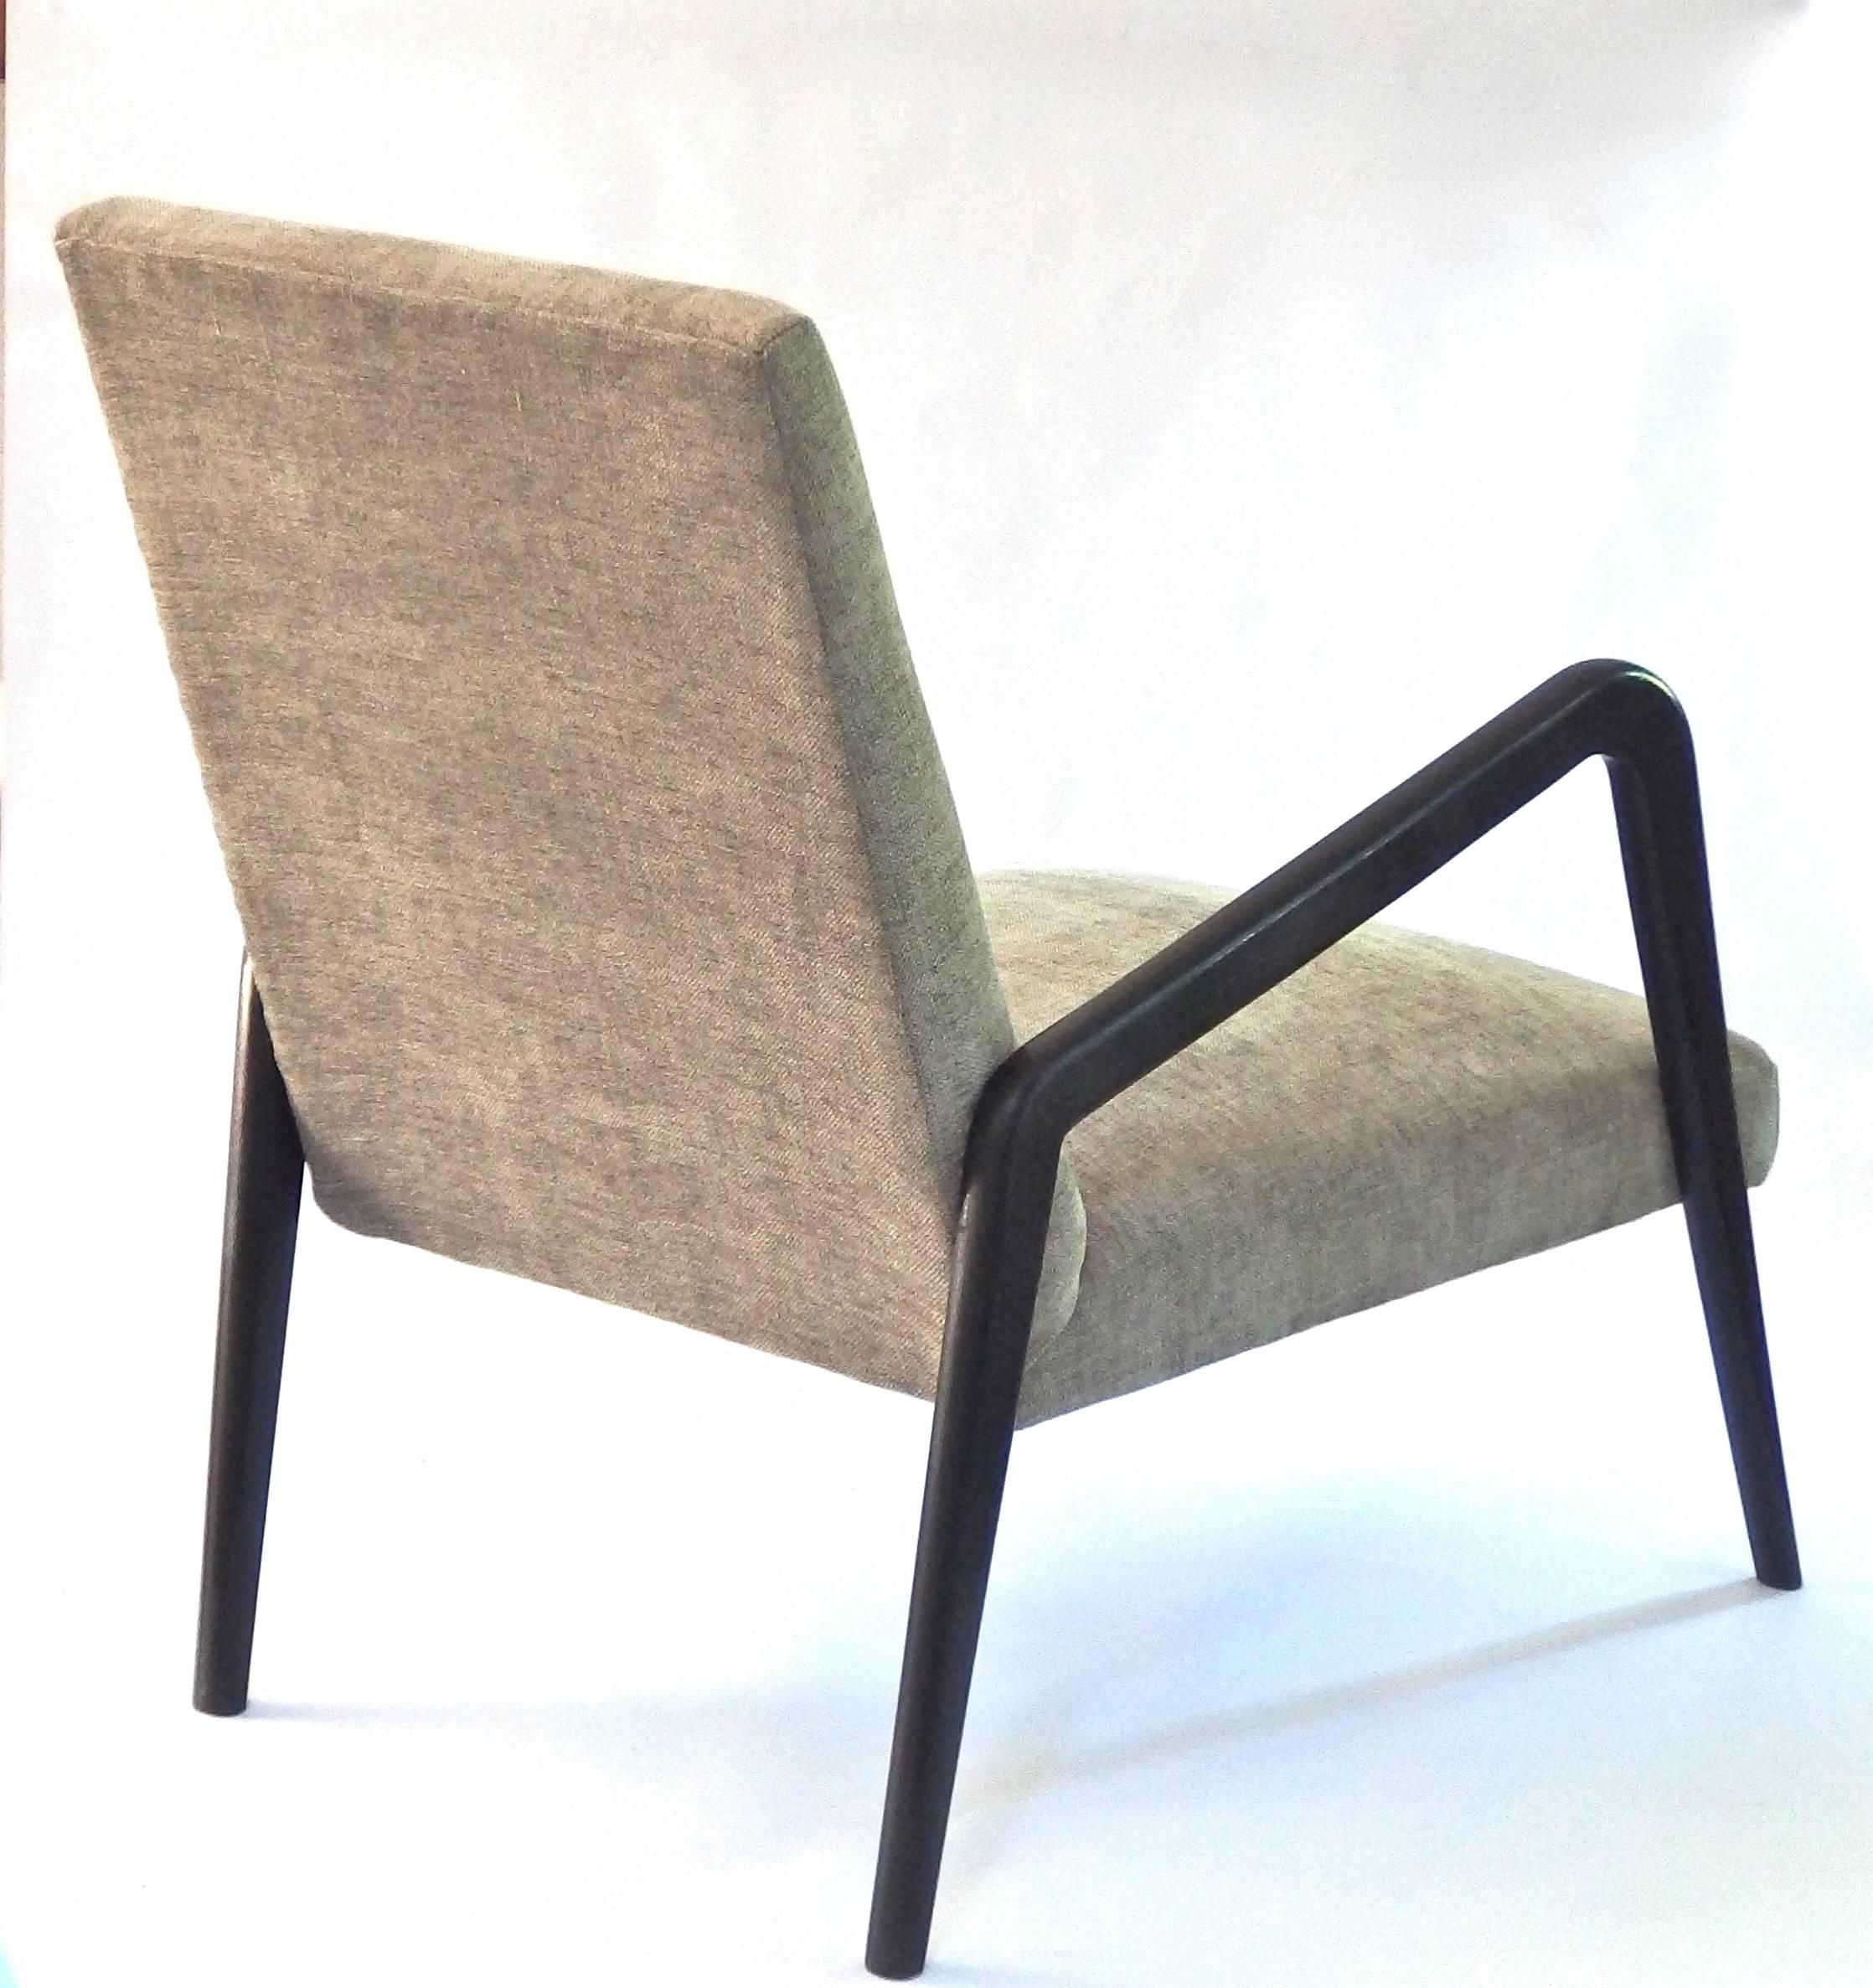 Pair of very elegant black Italian lounge chairs newly upholstered with a warm grey chenille fabric. Very comfortable, great design!